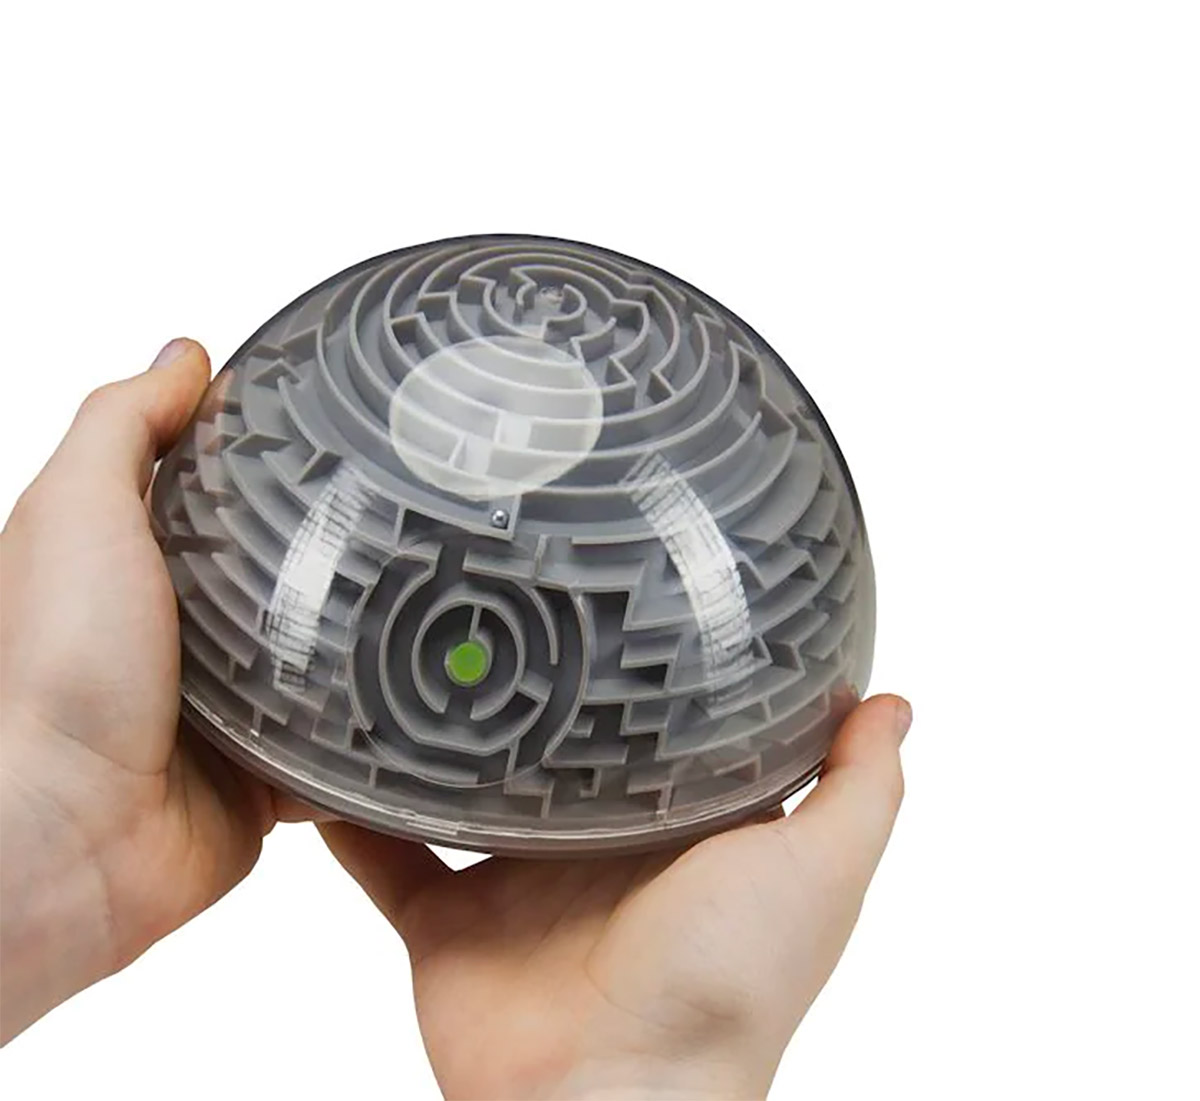 OFFICIAL STAR WARS DEATH STAR PUZZLE MAZE GAME 